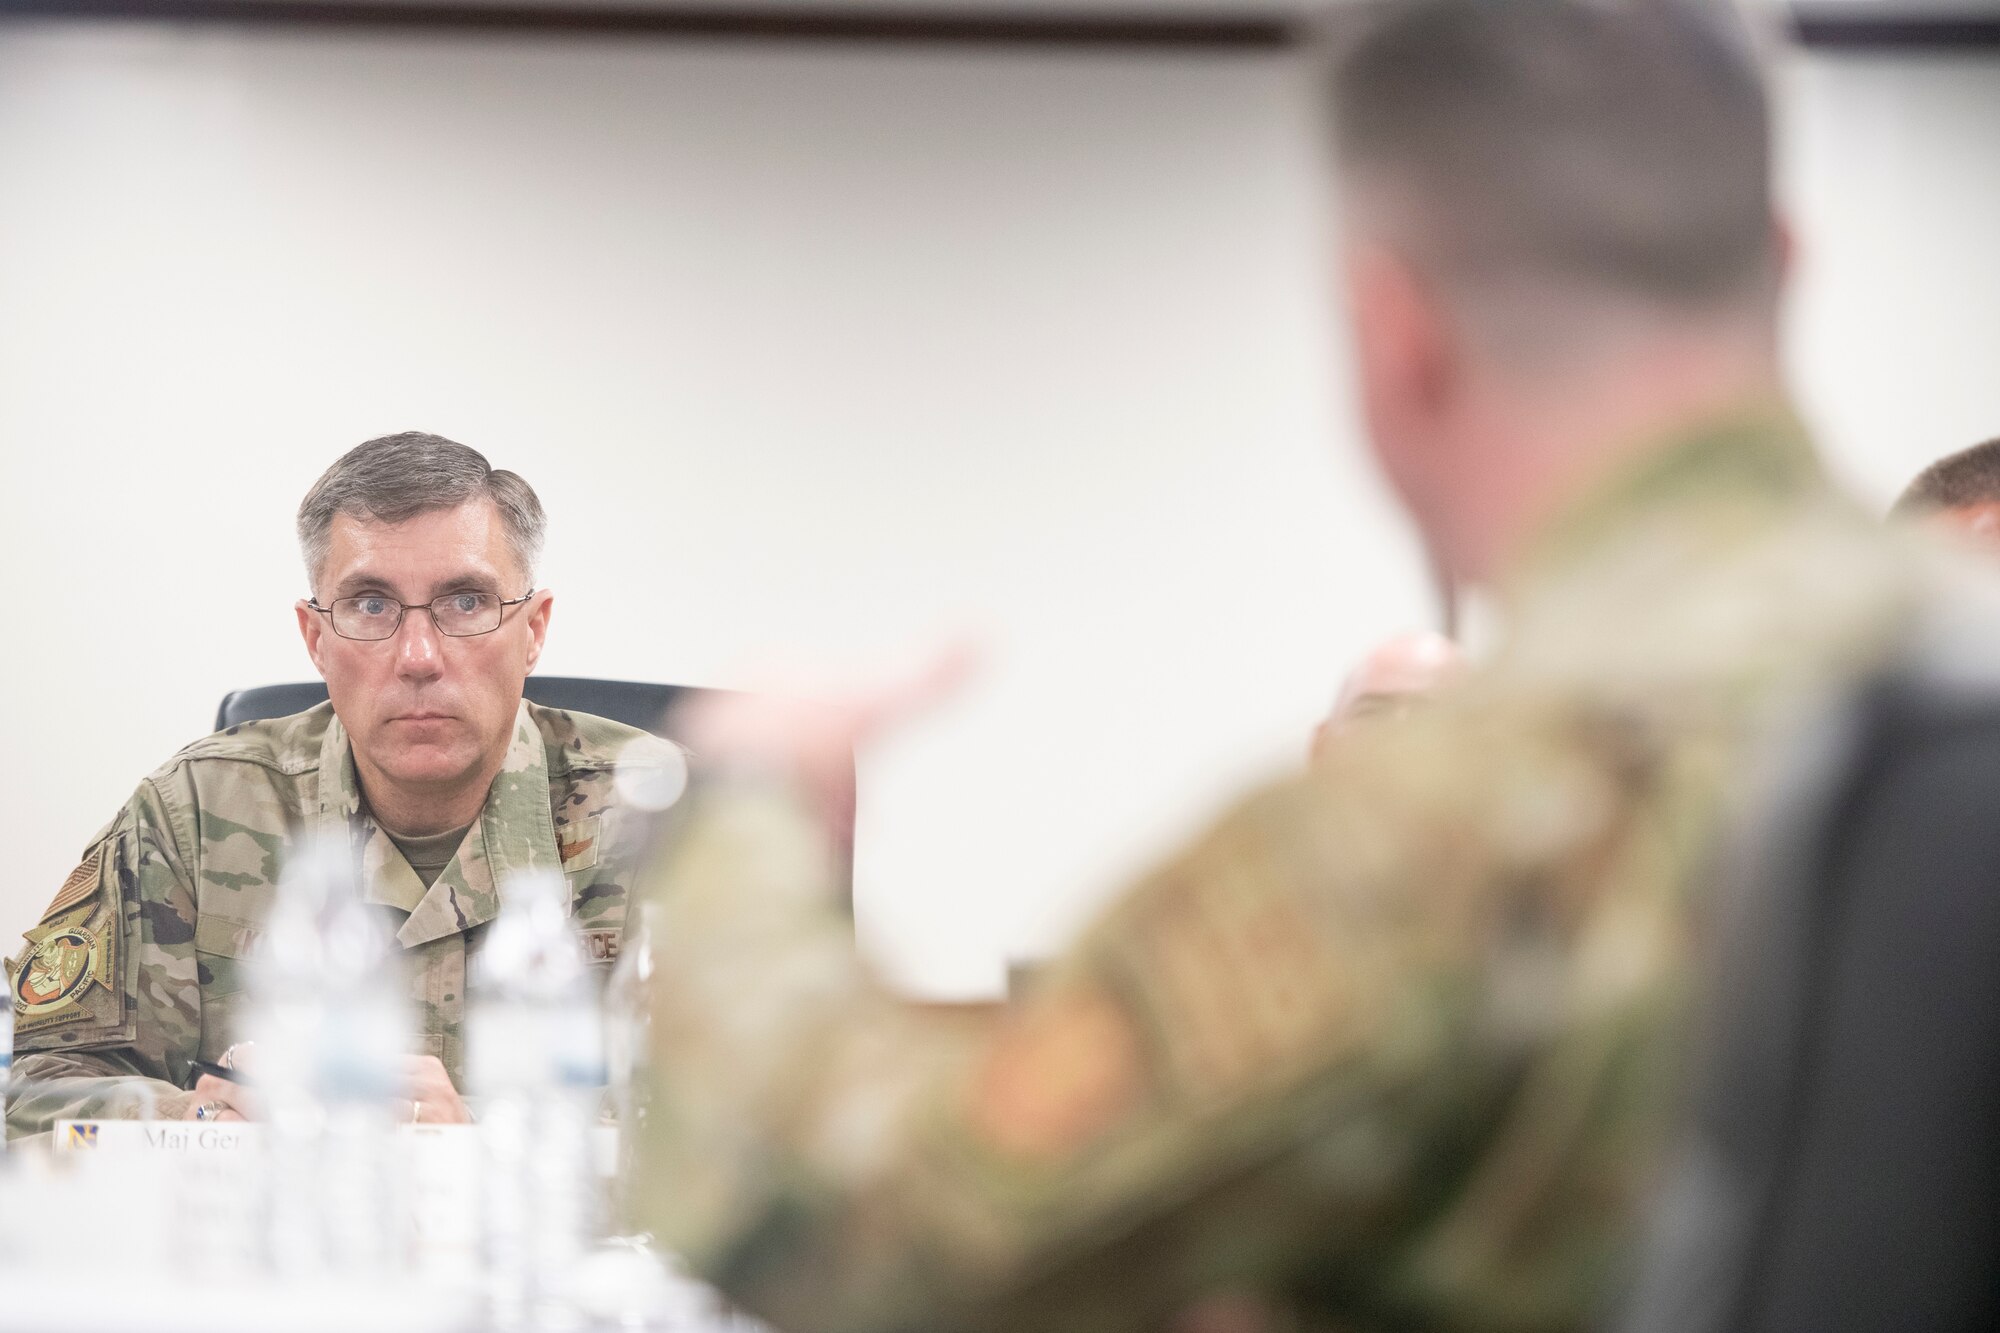 Two soldiers converse at a conference table